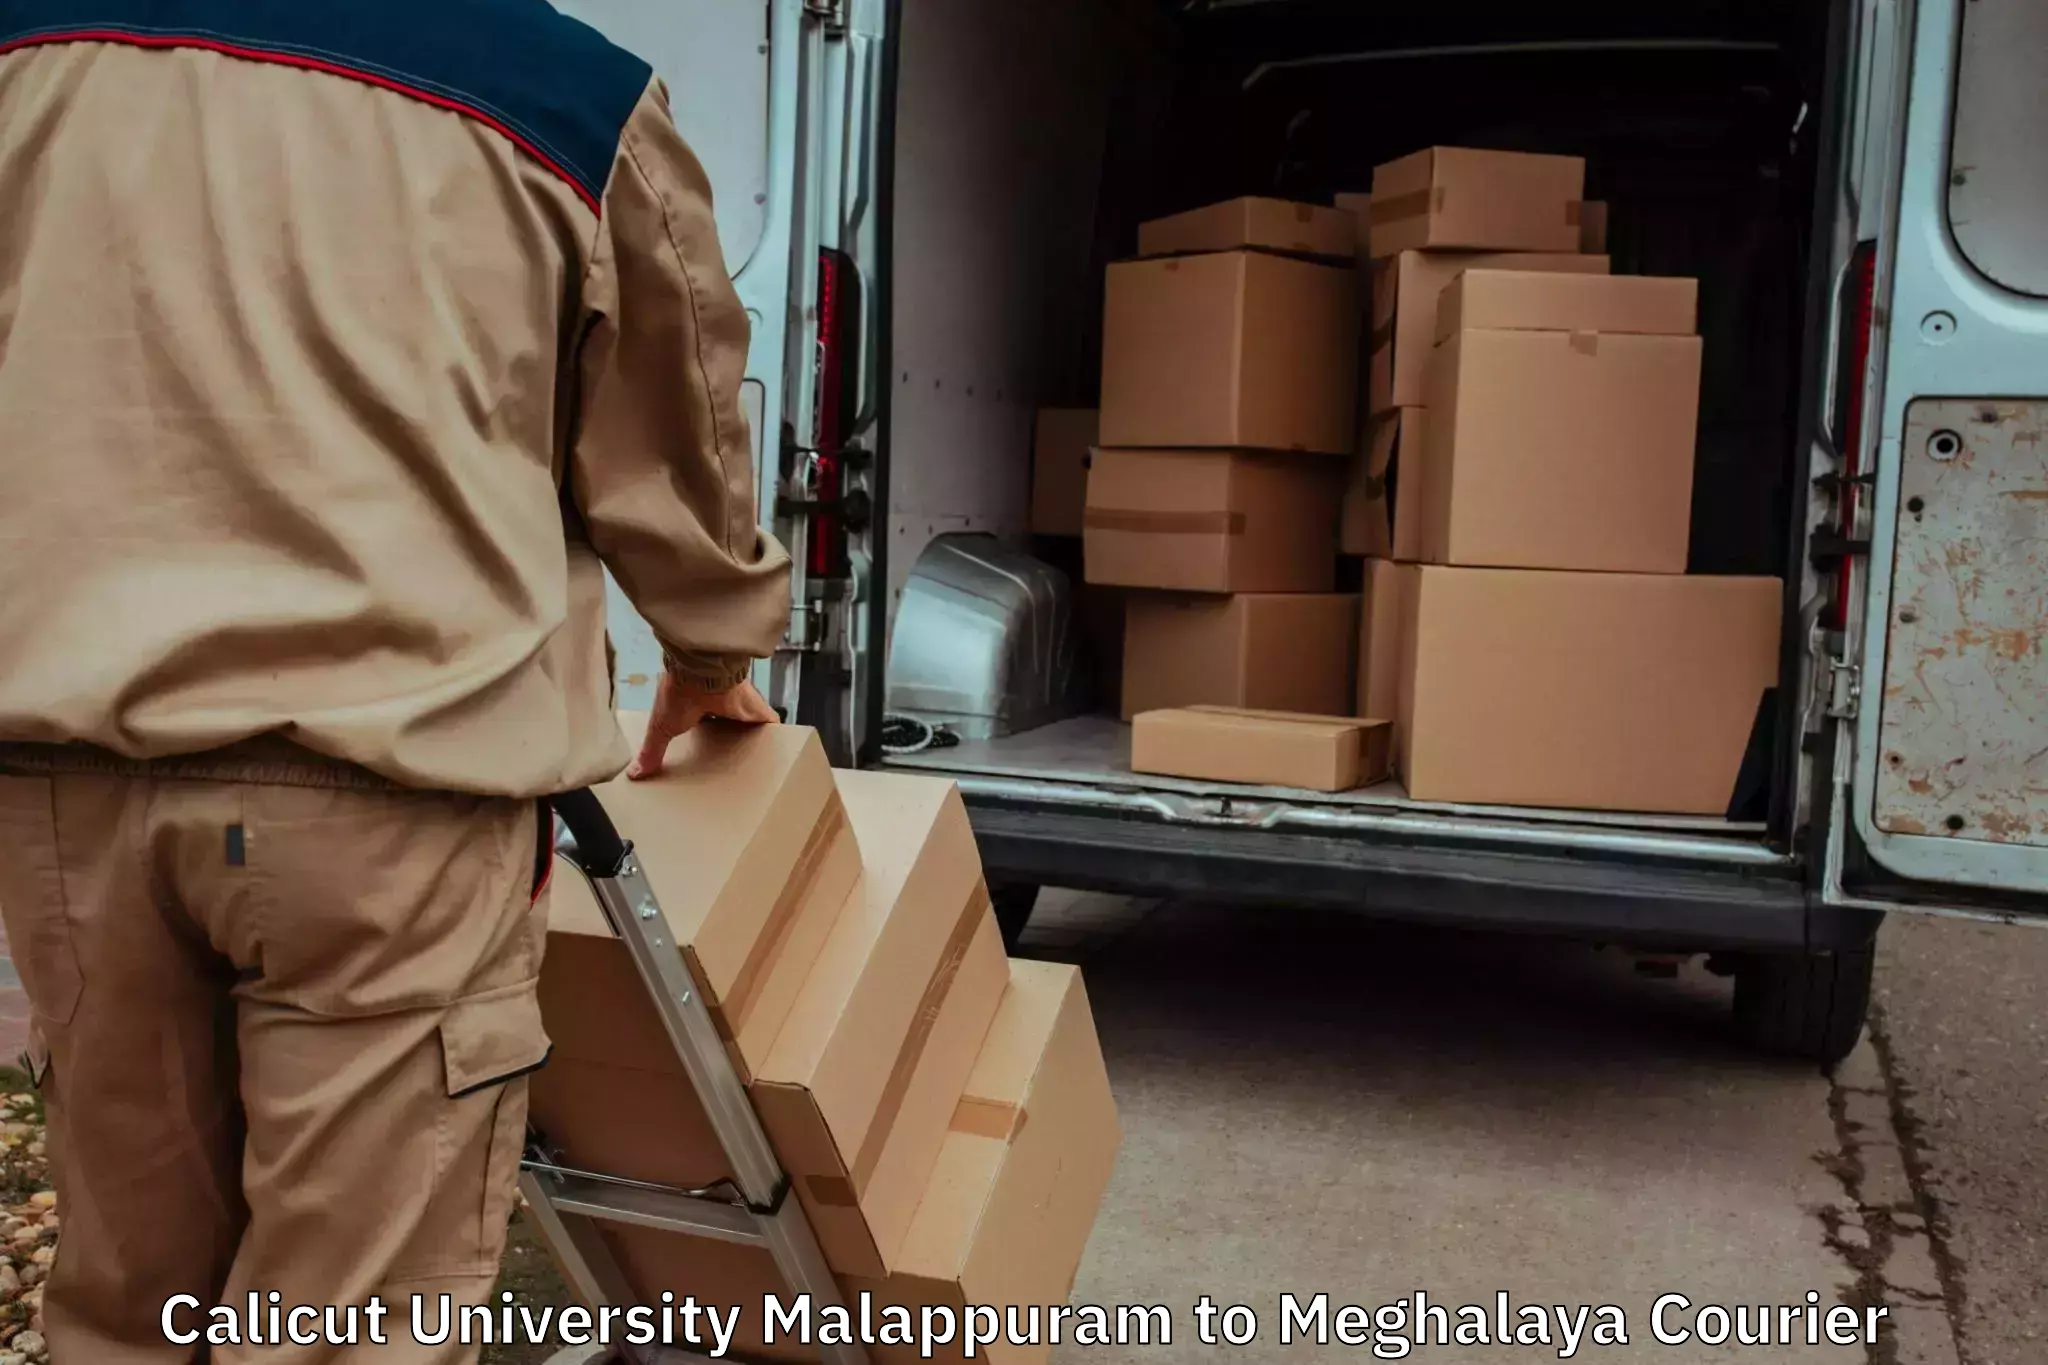 Trusted relocation services Calicut University Malappuram to Dkhiah West